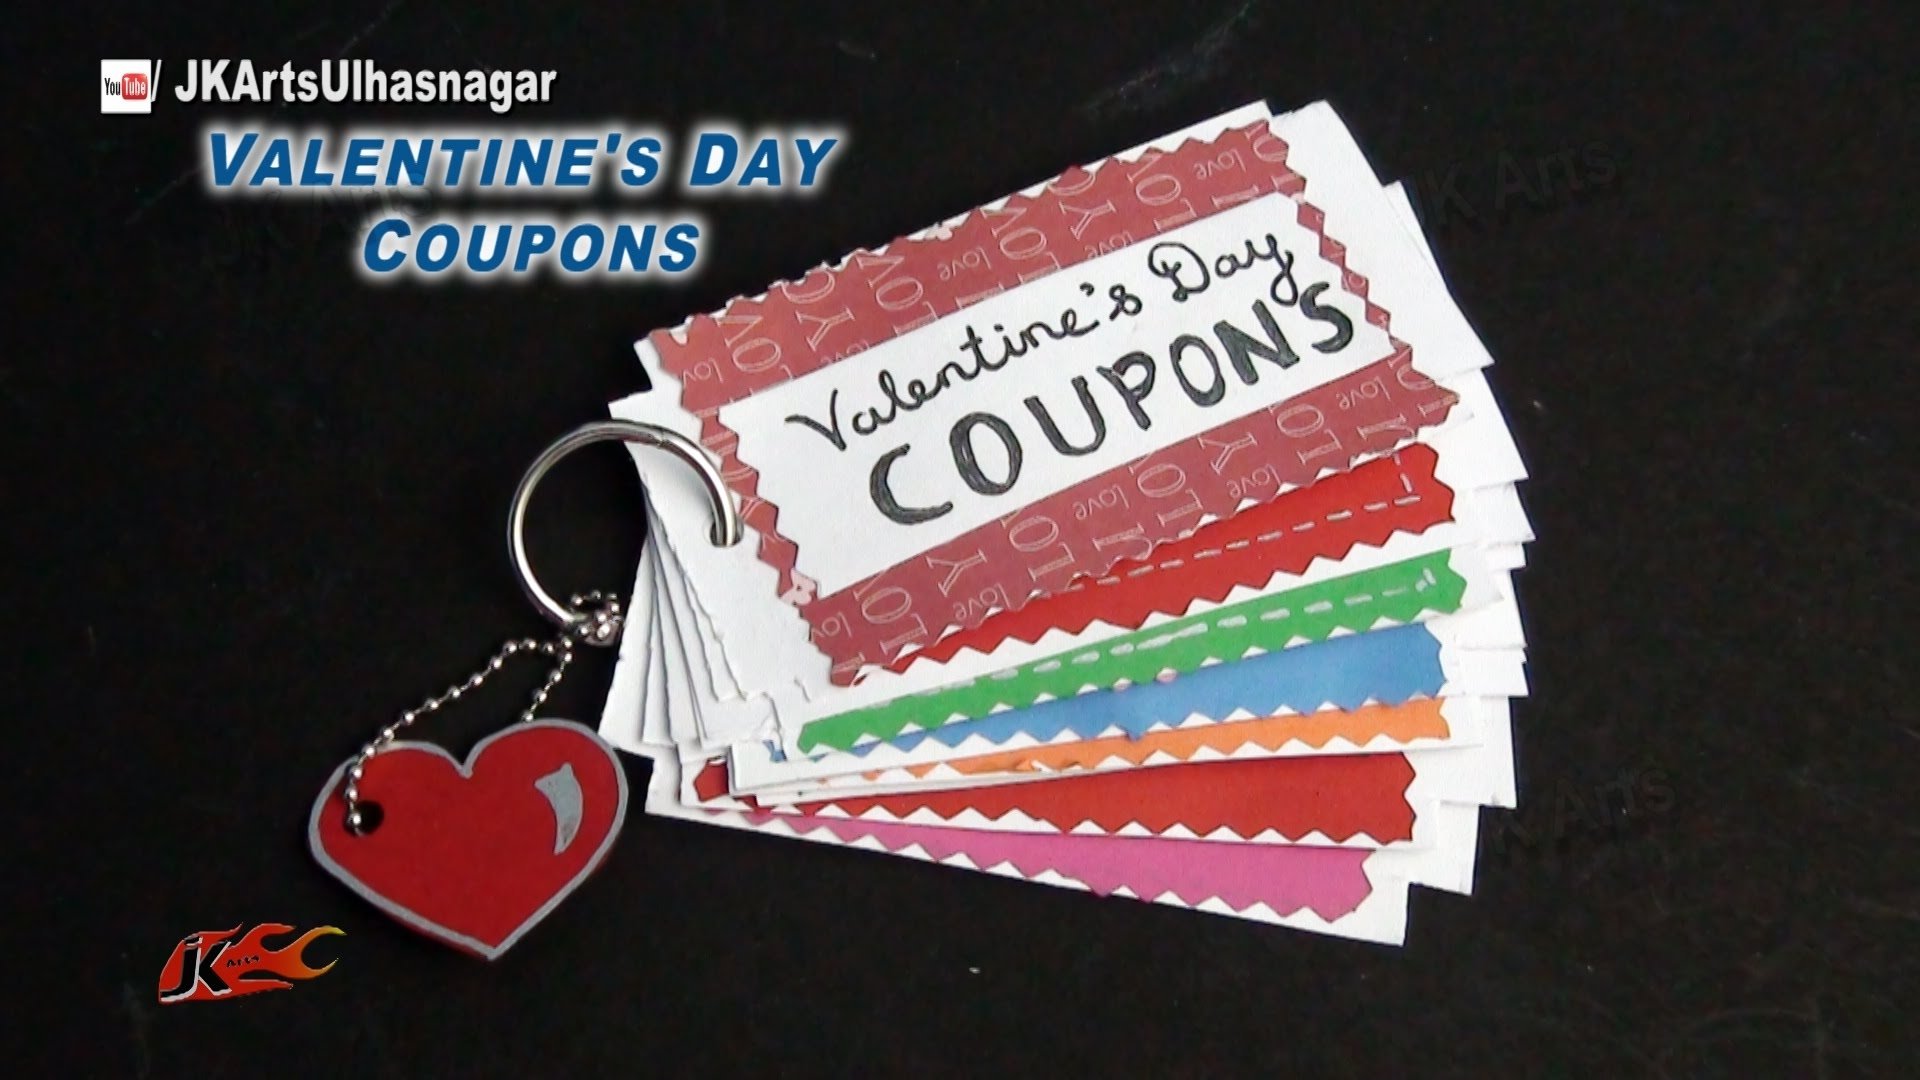 10 Elegant Homemade Coupon Book For Boyfriend Ideas diy love coupon book valentines day gift idea jk arts 857 youtube 2022